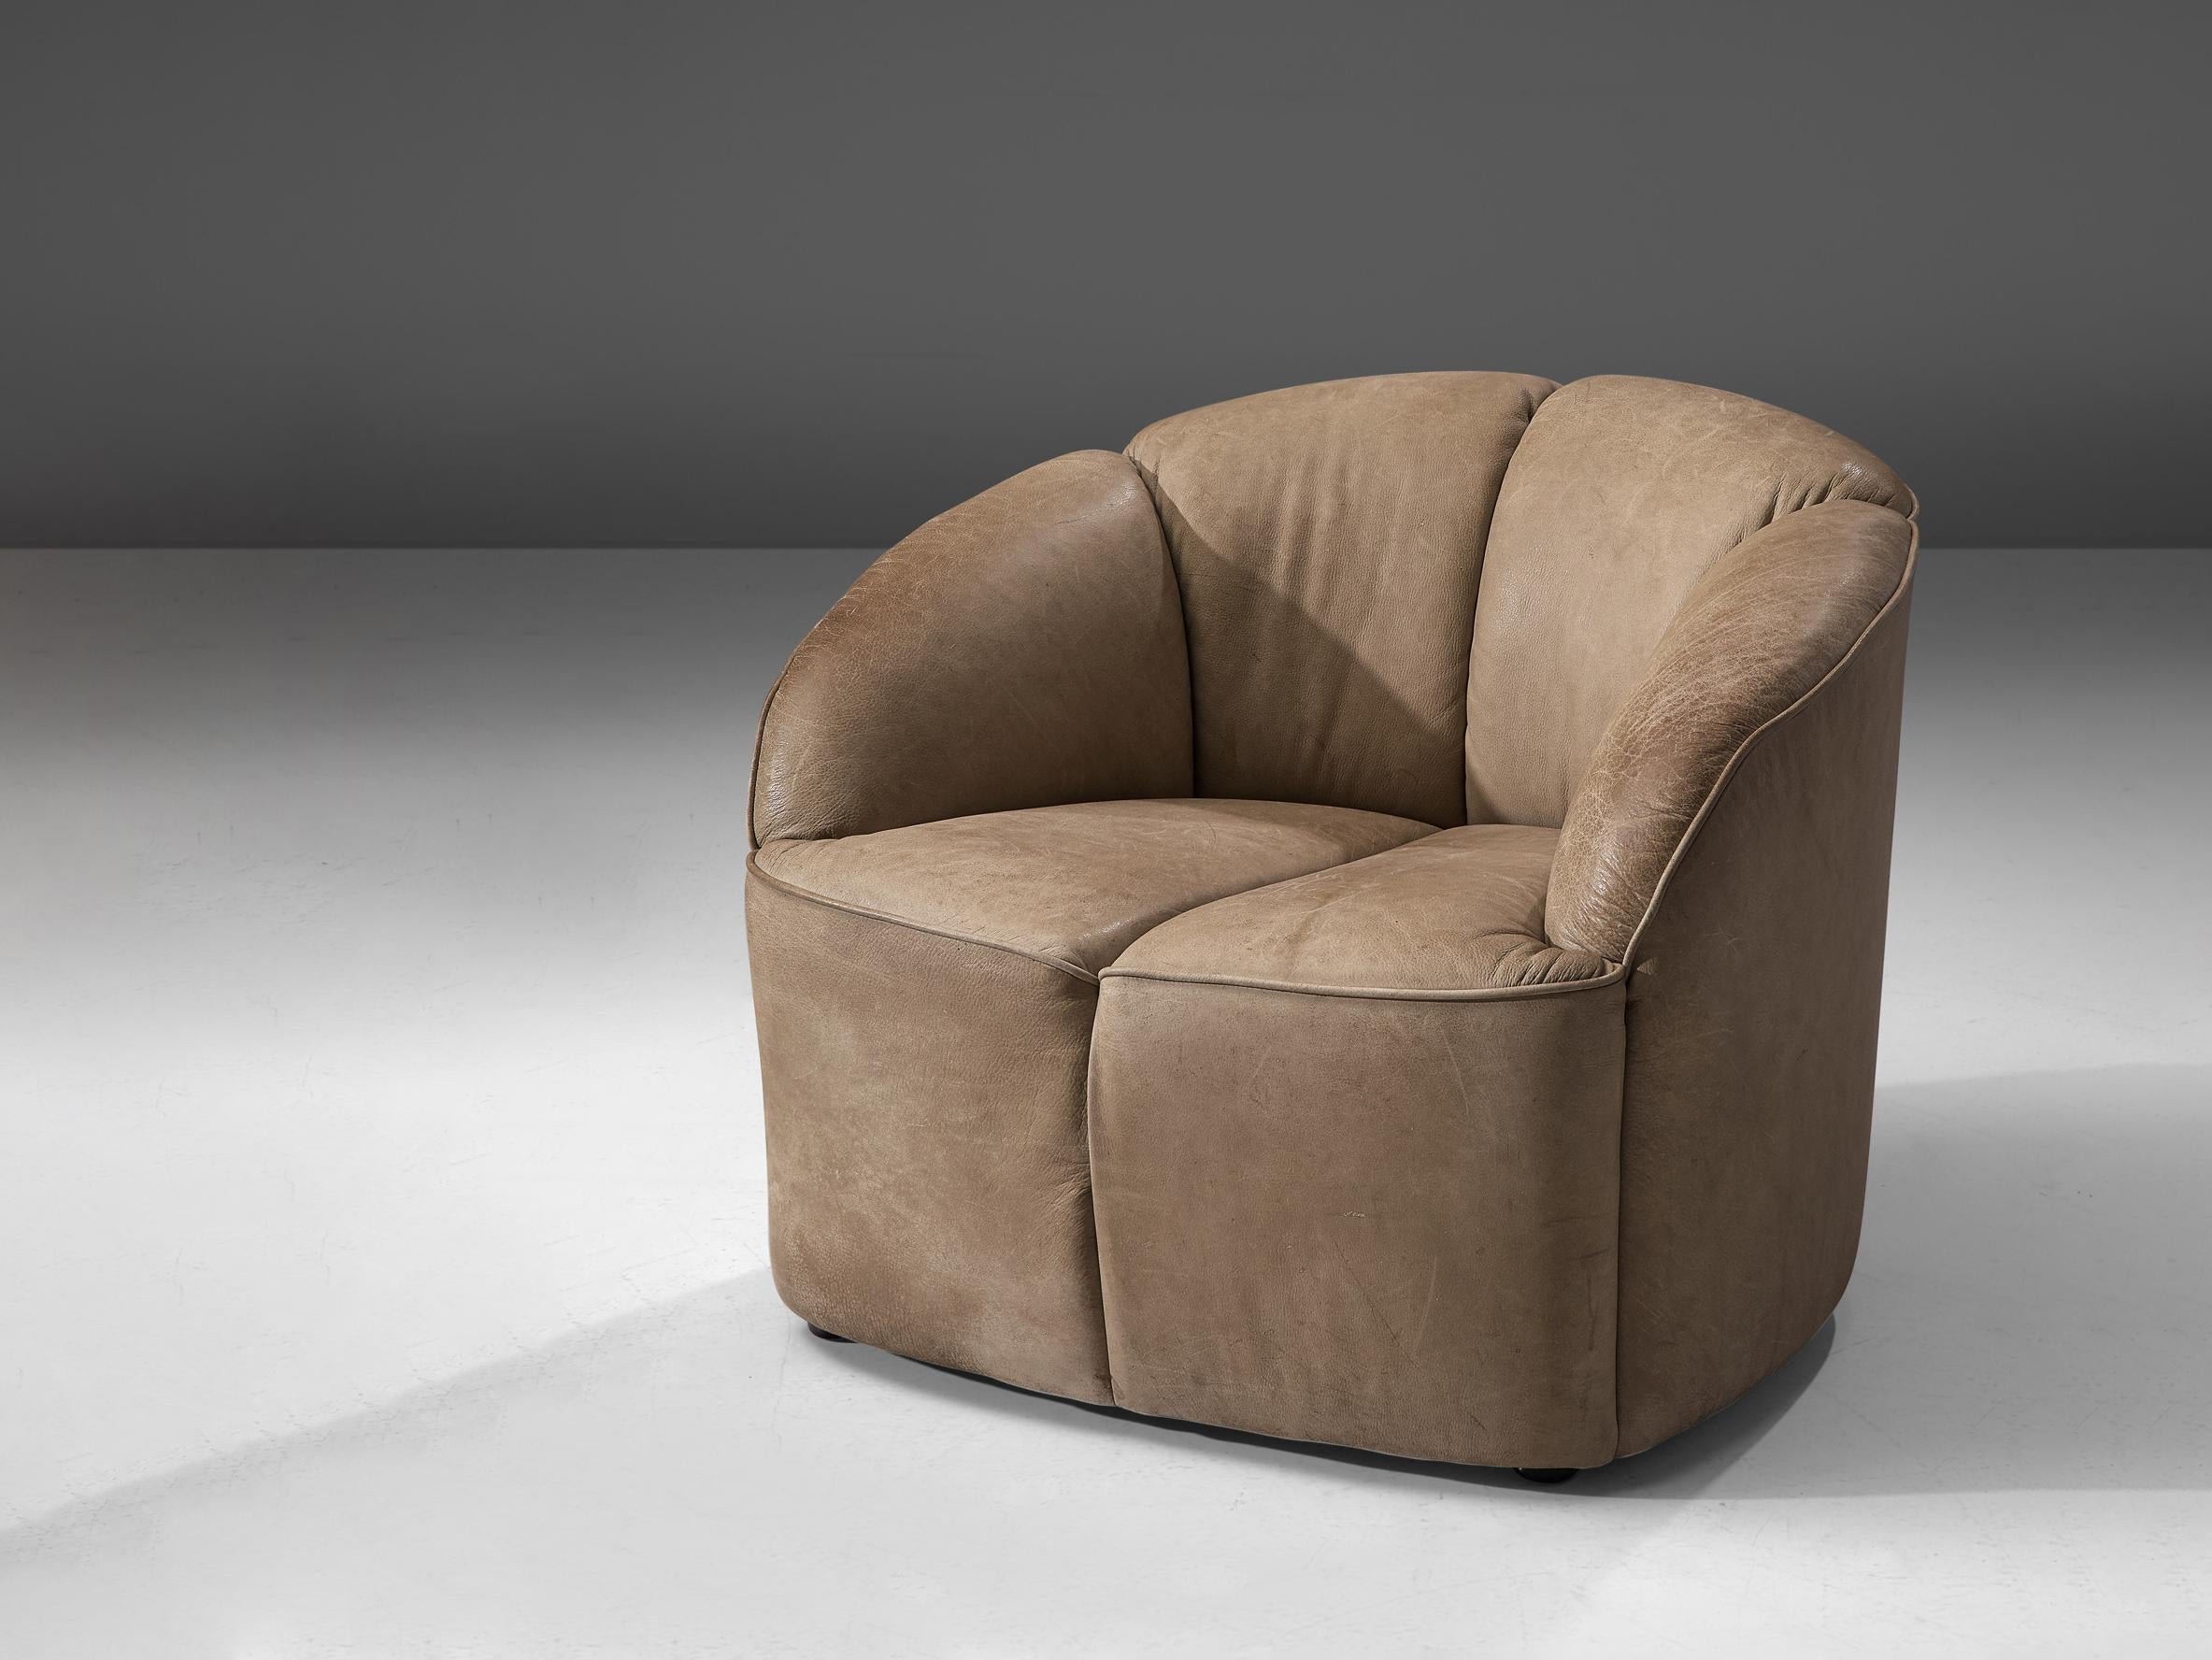 Walter Knoll, chaise longue 